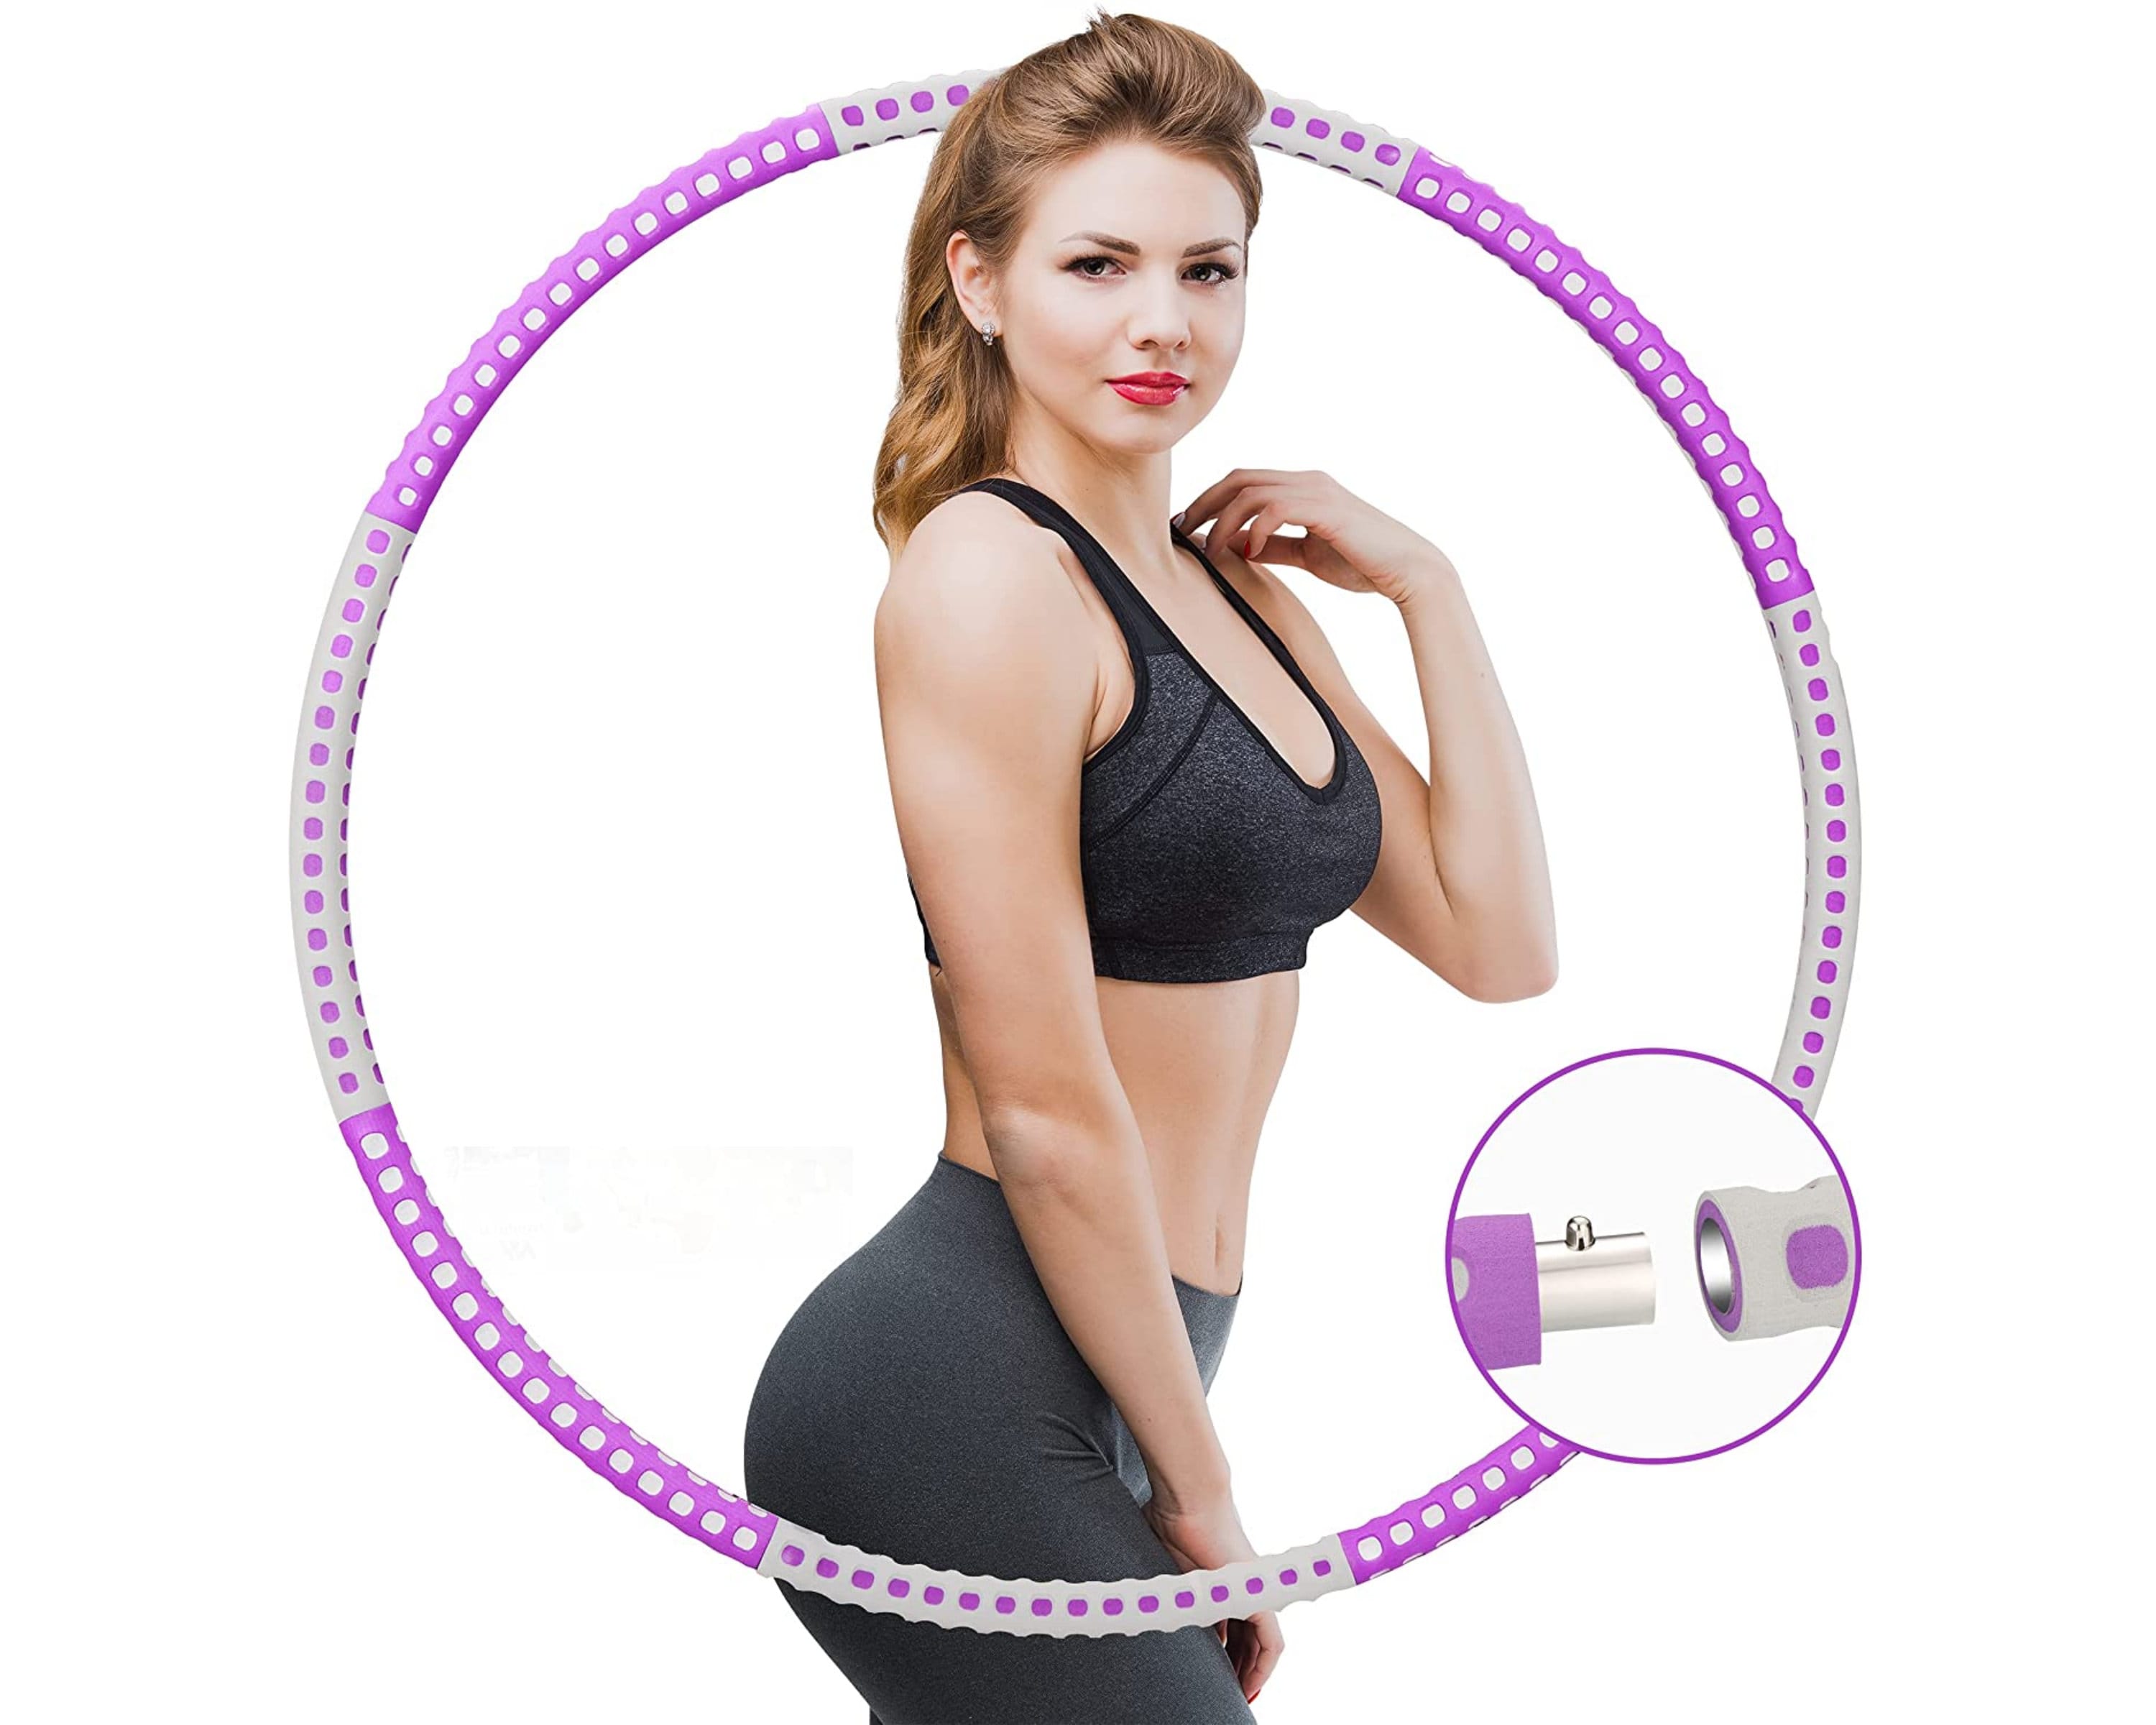 Exercise Fitness Hula Hoop for Adults - 2lbs - Detachable Weighted Hoops,  Premium Quality and Soft Padding